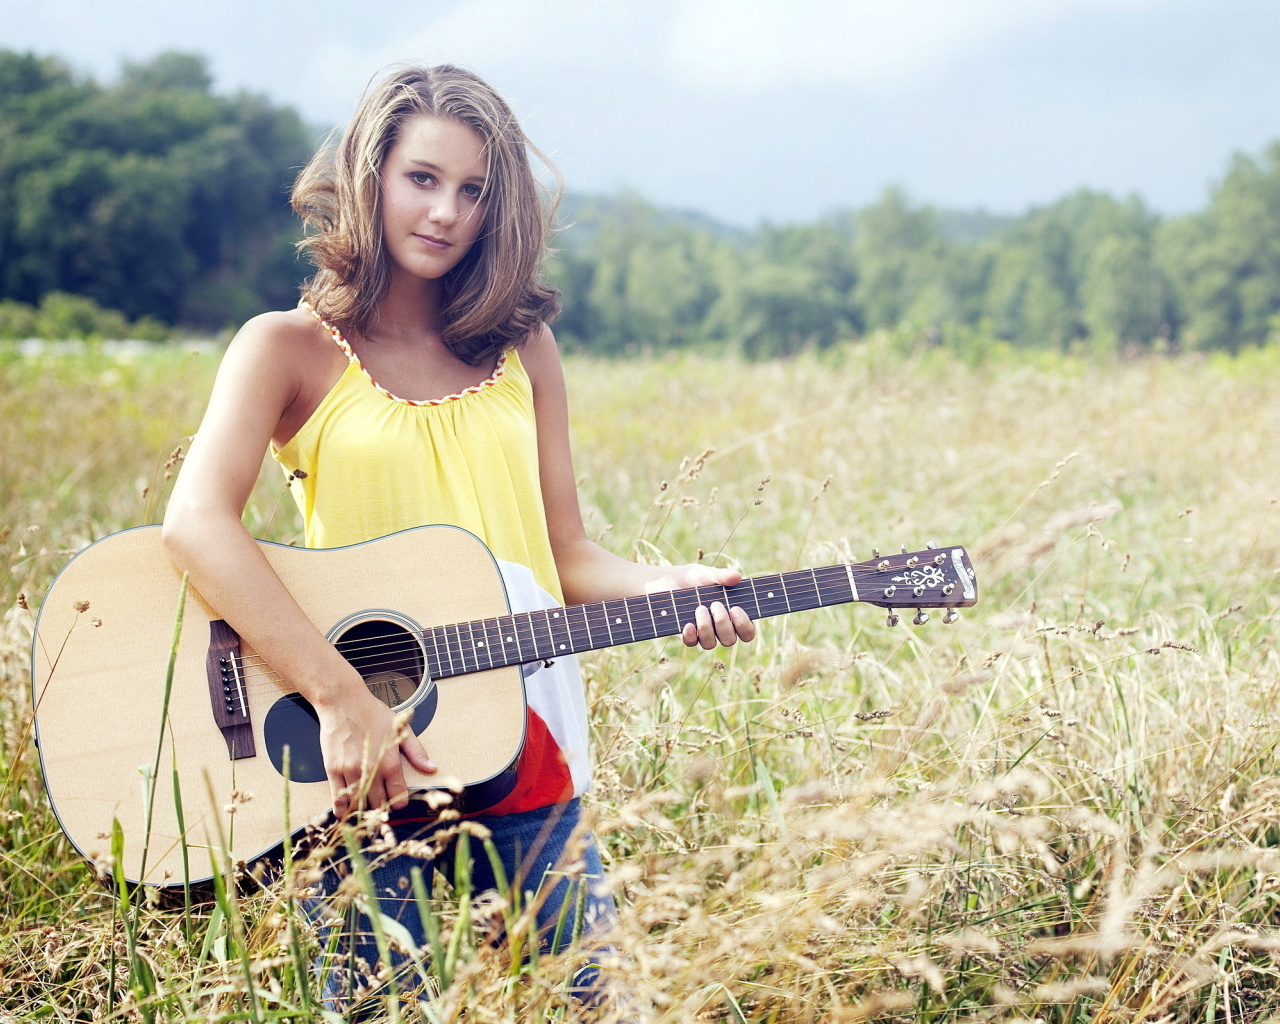 Girl with Guitar wallpaper 1280x1024